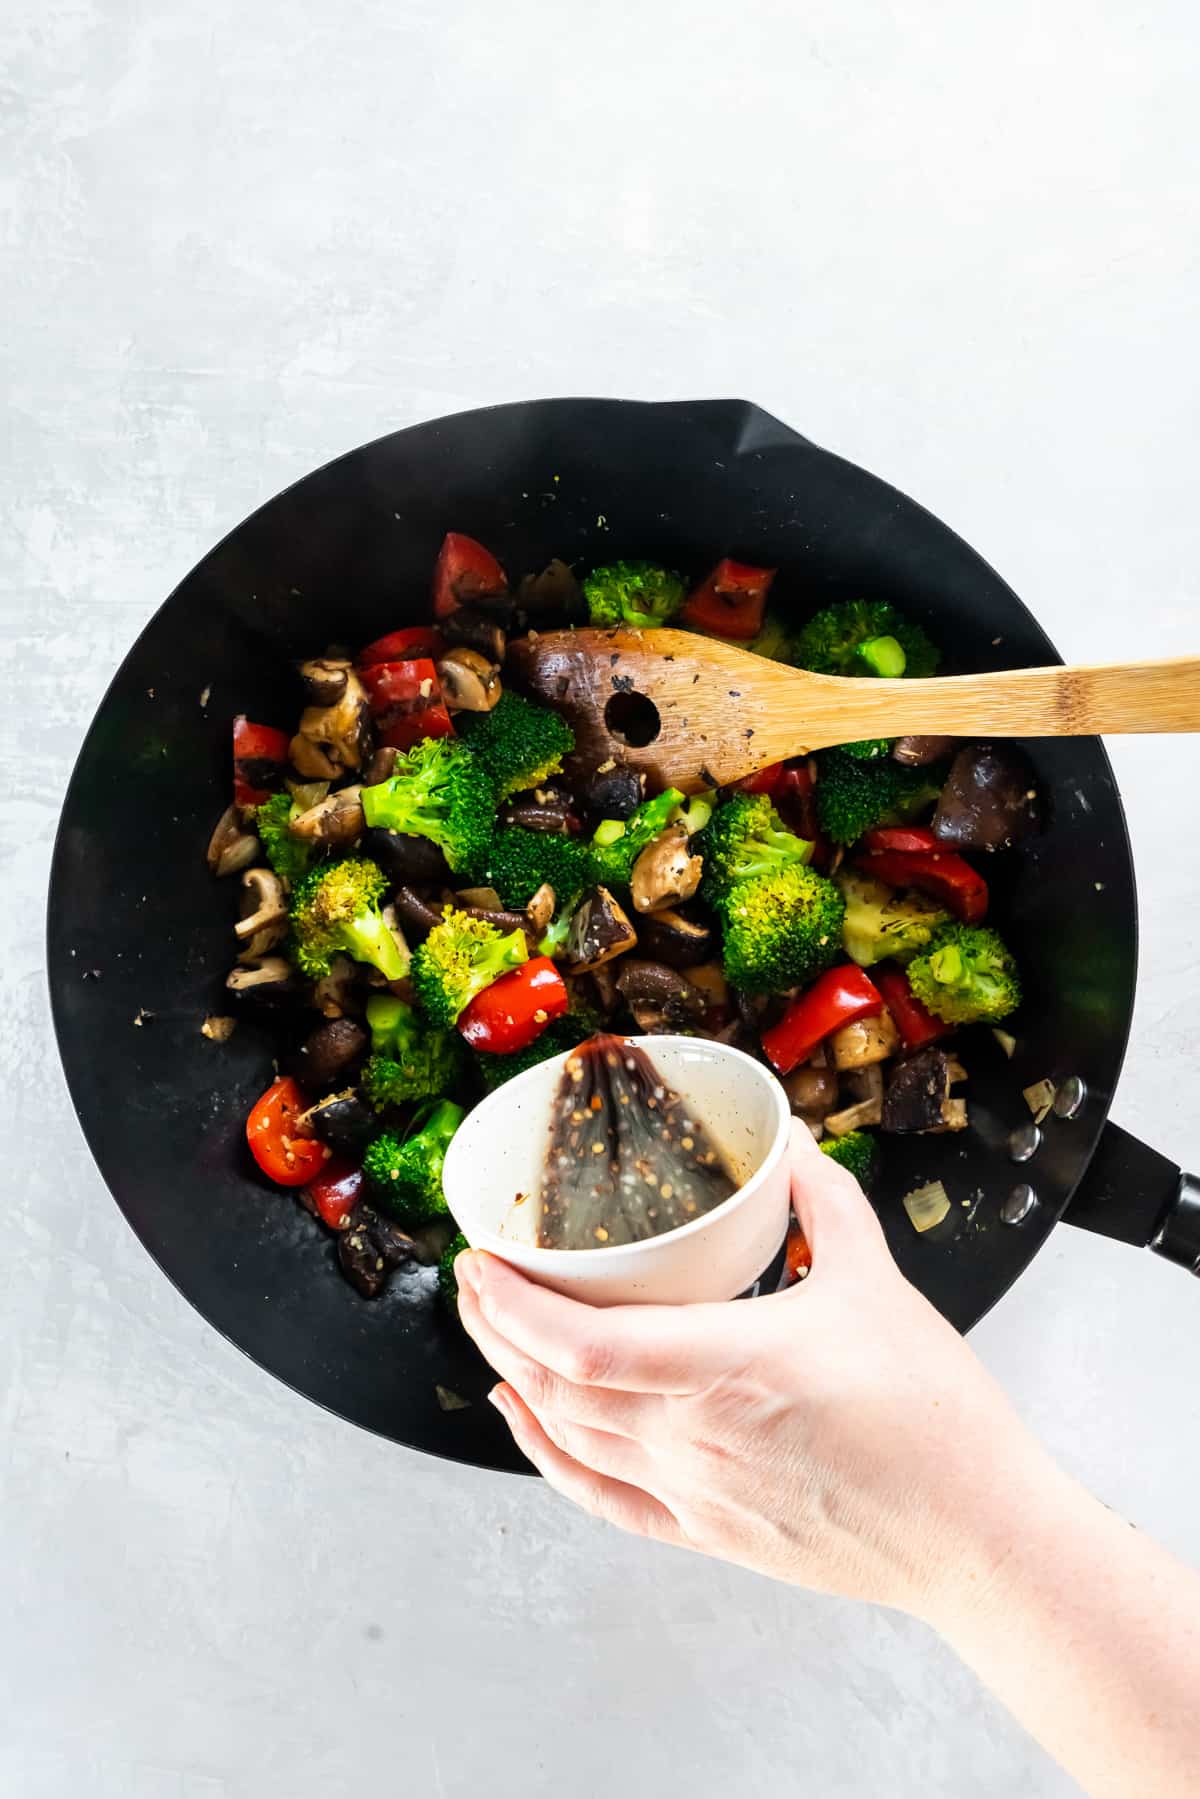 A hand pouring stir fry sauce from a small bowl into vegetables in a wok.